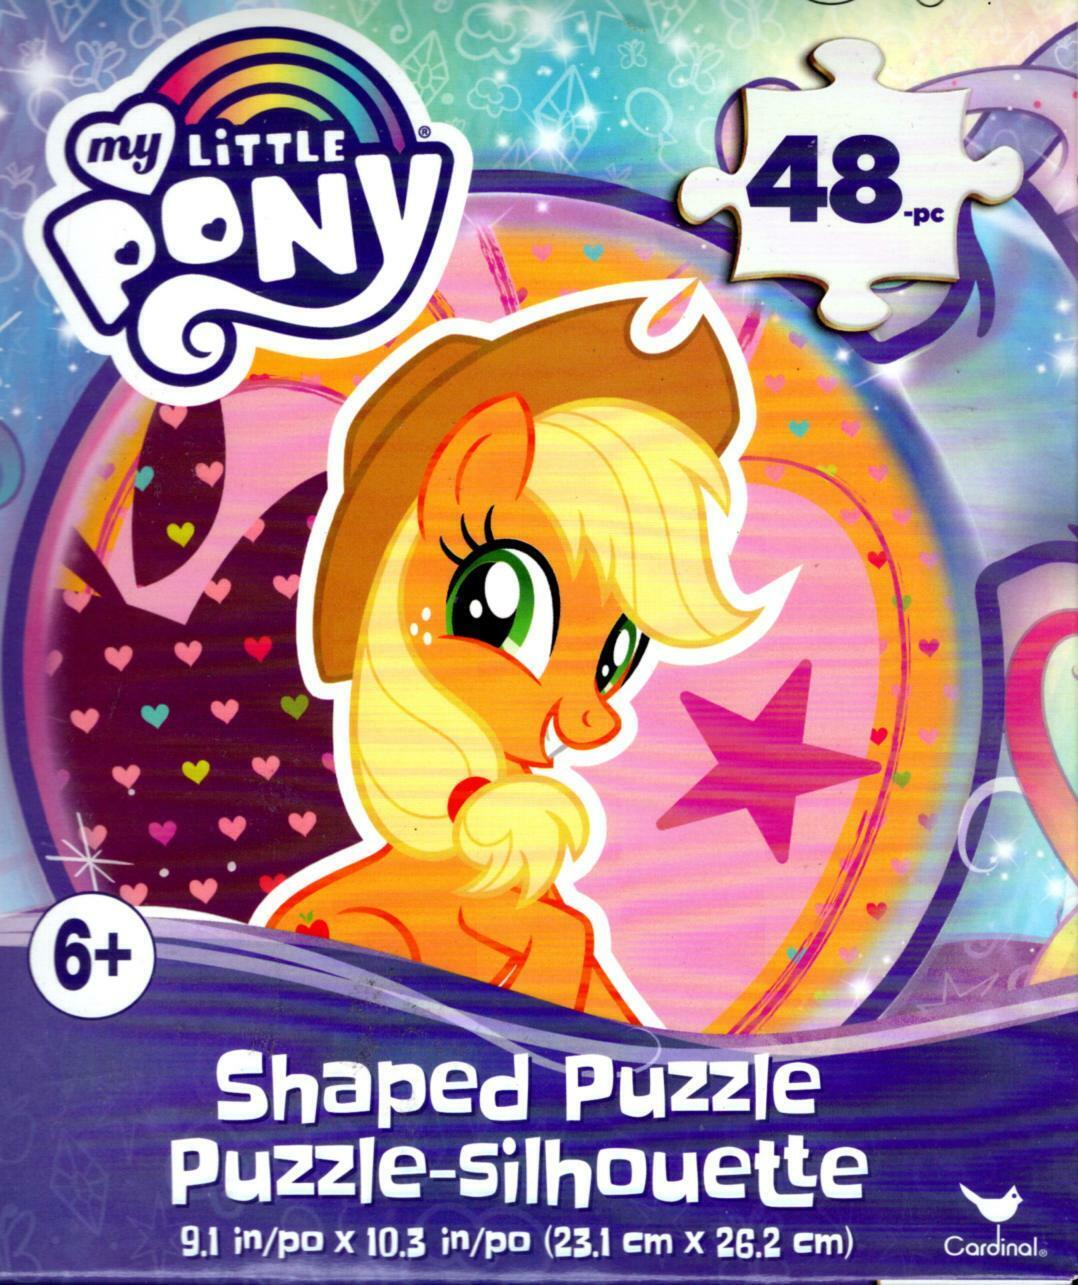 My Little Pony - 48 Shaped Puzzle